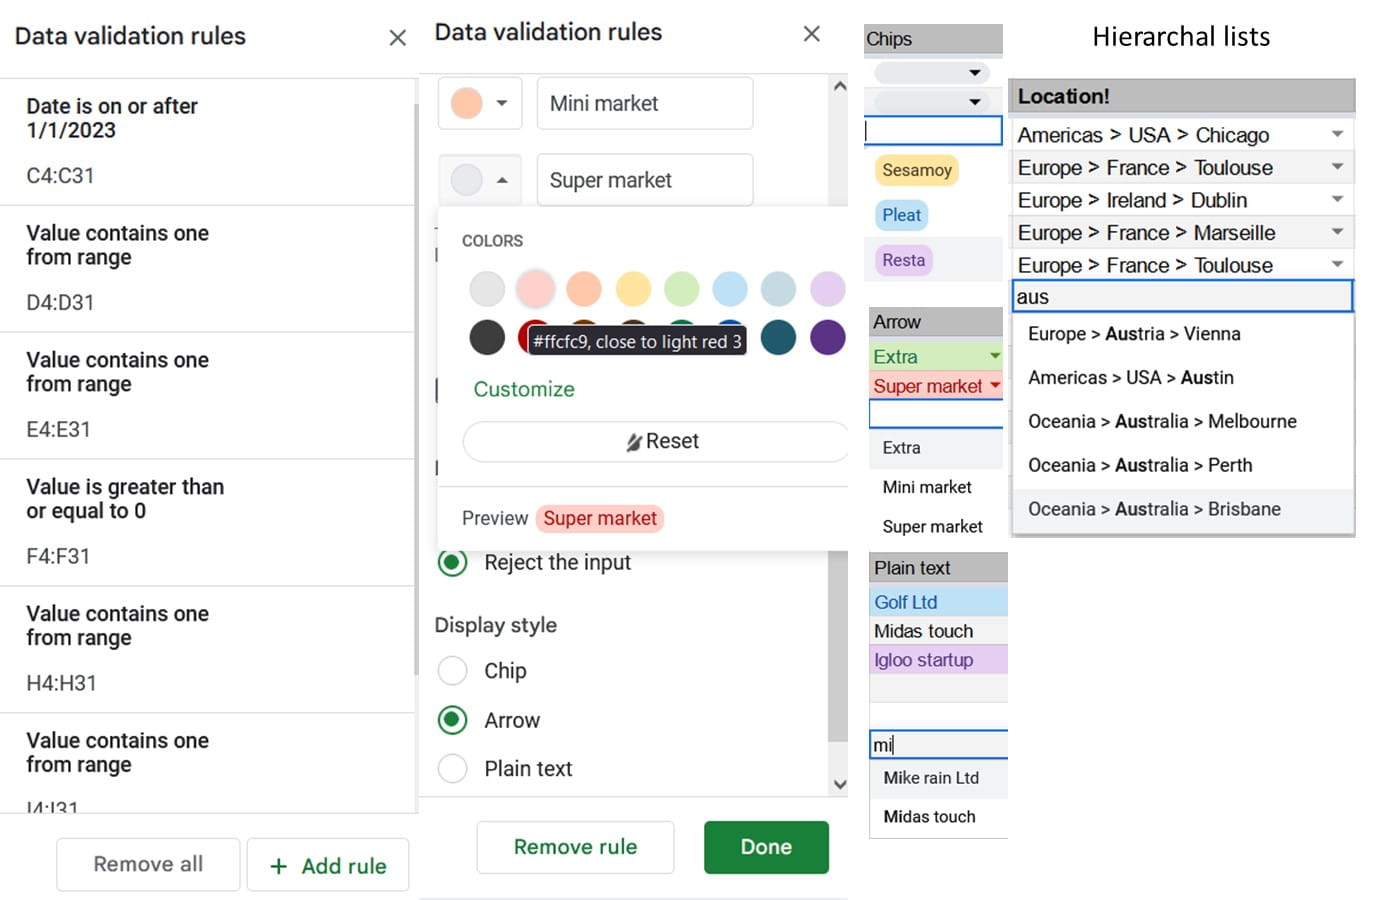 Screenshot of hierarchal lists in Google Sheets data validation rules